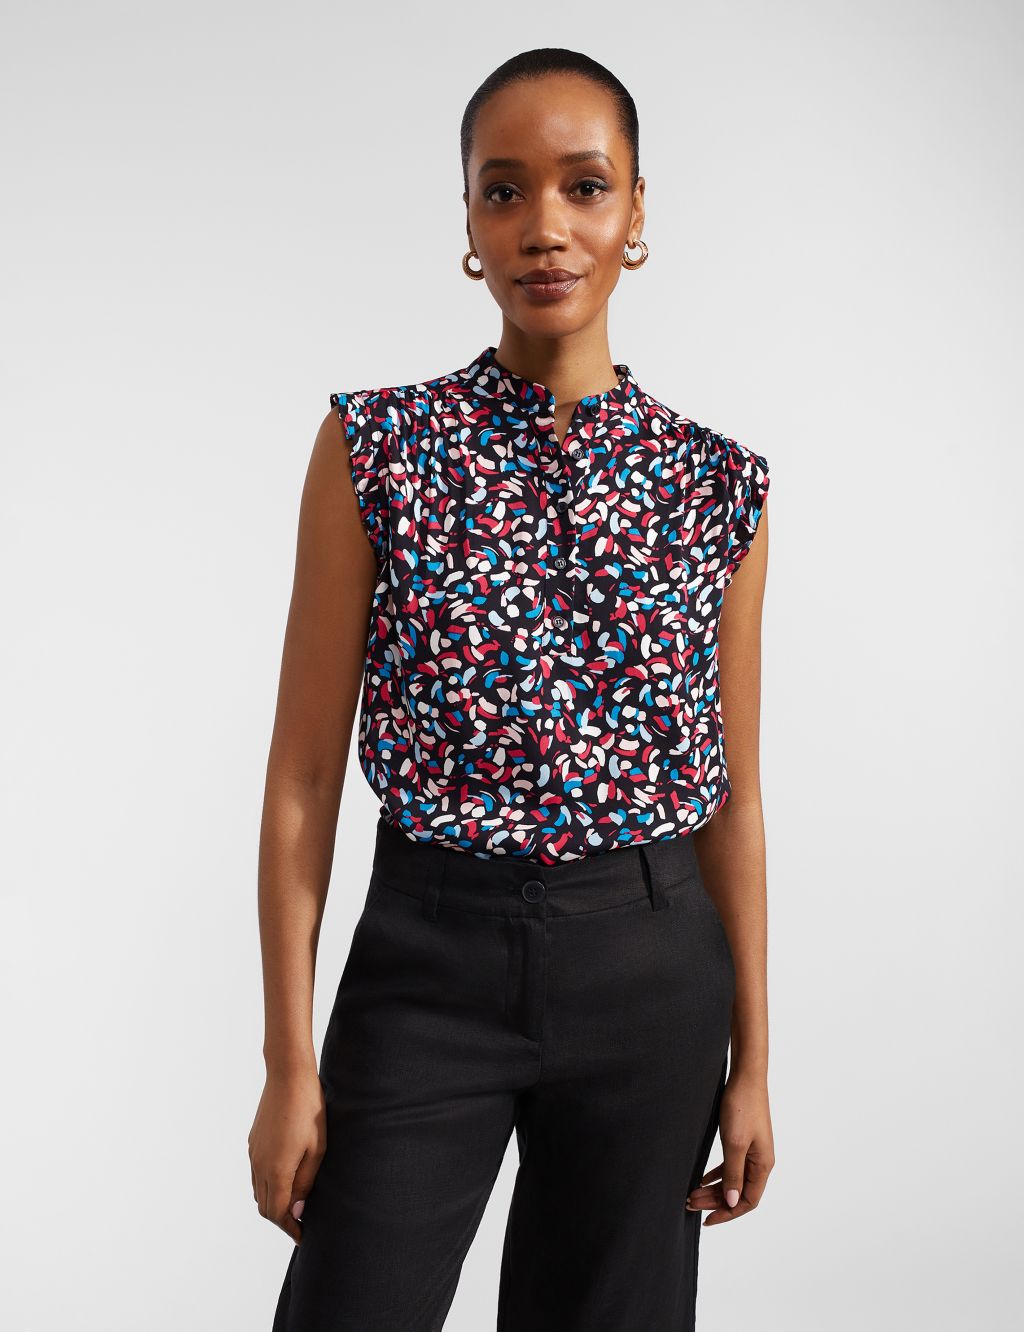 Brushed Jacquard High Neck Top, M&S Collection